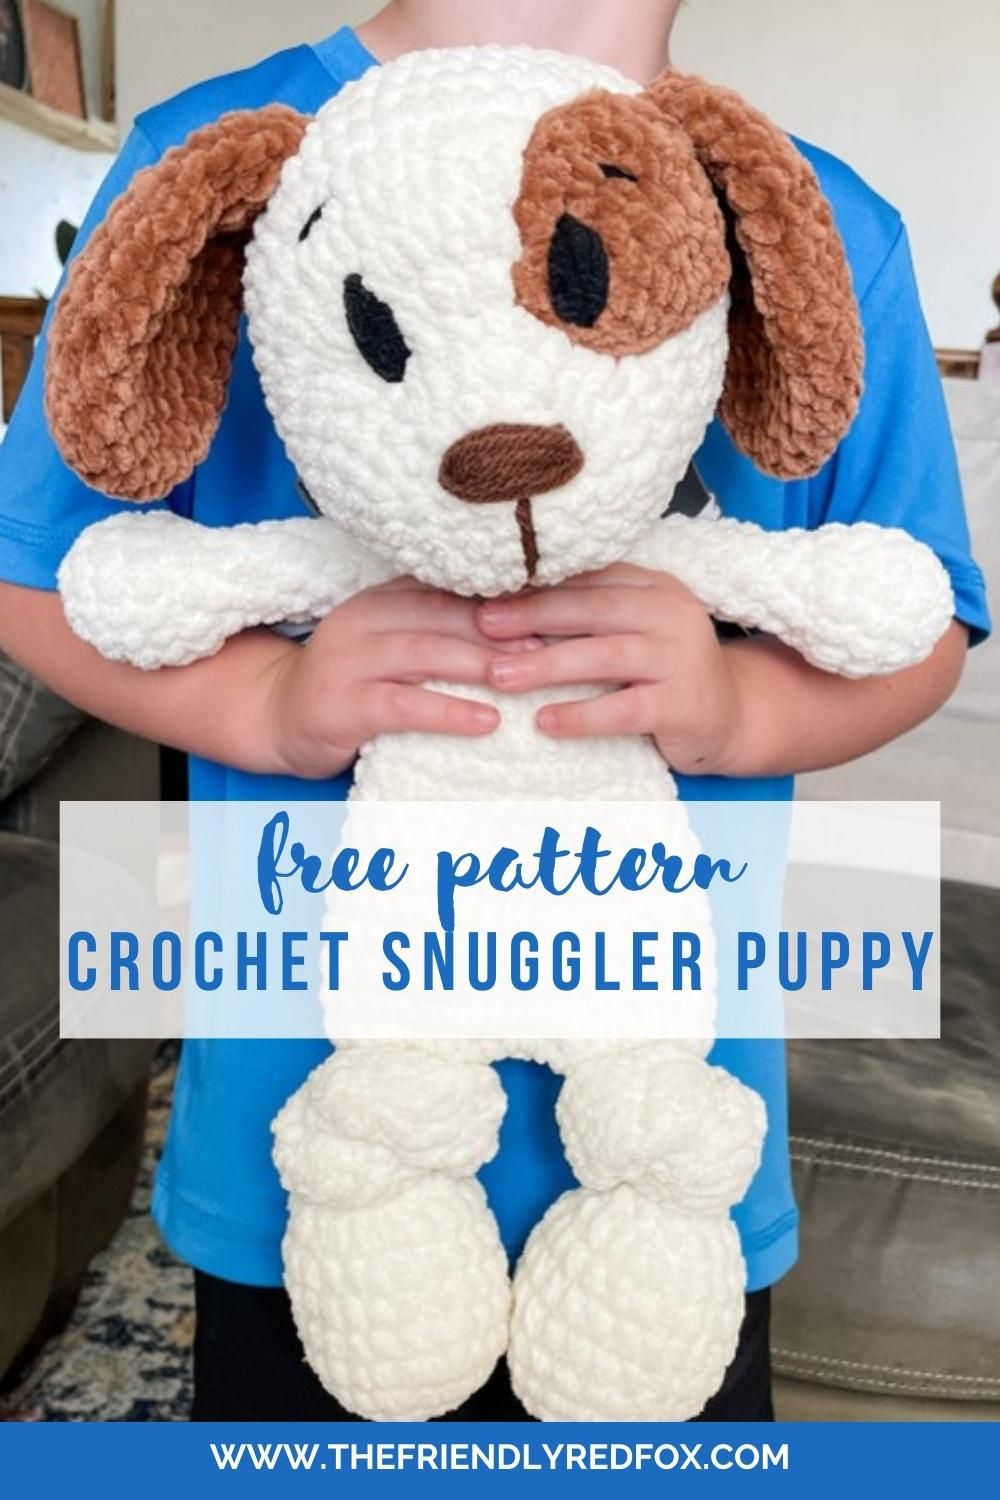 This is a free crochet snuggler pattern of the cuddly classic puppy! Half stuffed animal, half blanket but twice the fun! This crochet dog lovey would be a great crocheted nursery gift! Embroidered eyes and blanket yarn make it more baby friendly.